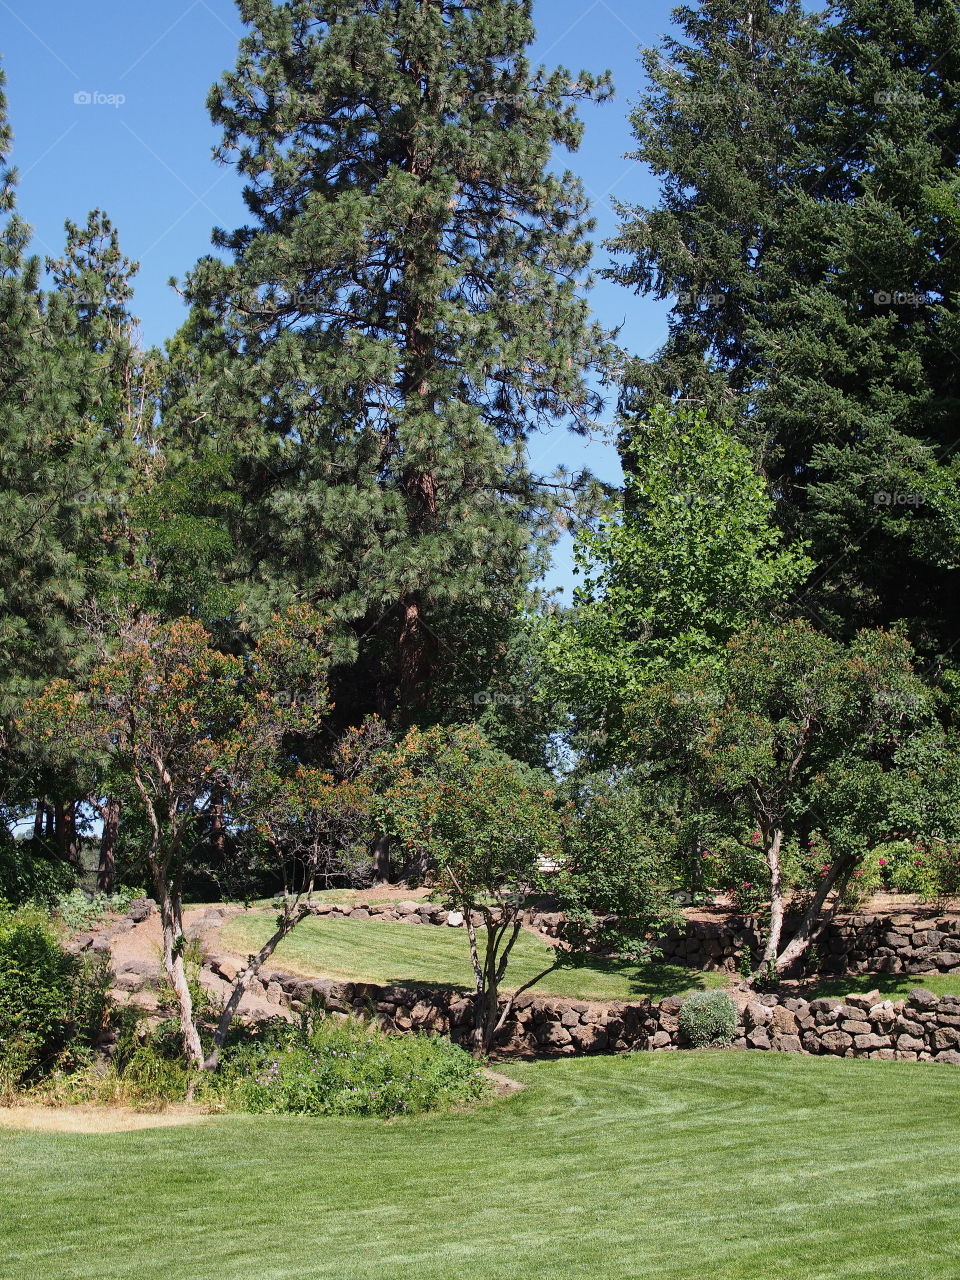 Multiple tiers with rock walls of different growth from grass to flowers and trees in Pioneer Park in Bend in Central Oregon on a beautiful sunny summer day. 